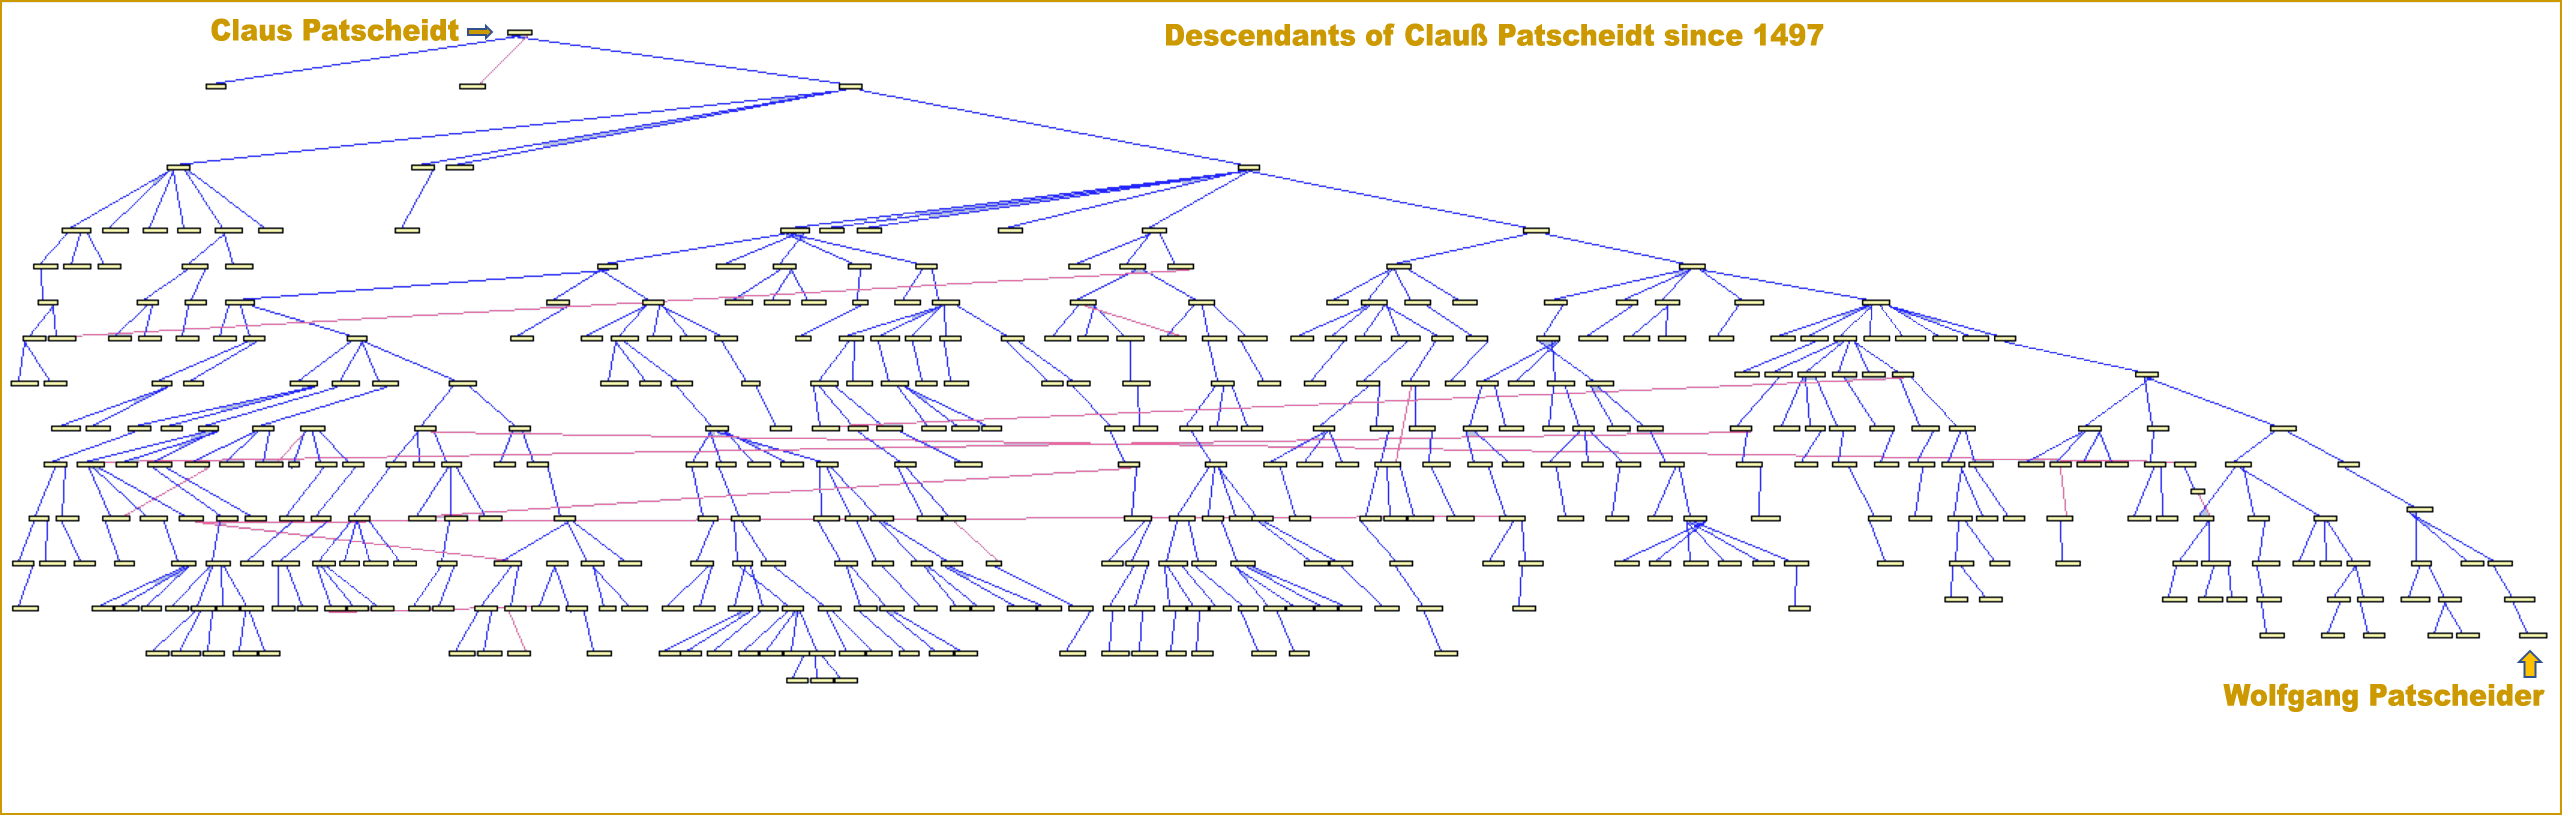 Family tree with descendants of Claus Patscheider since 1497